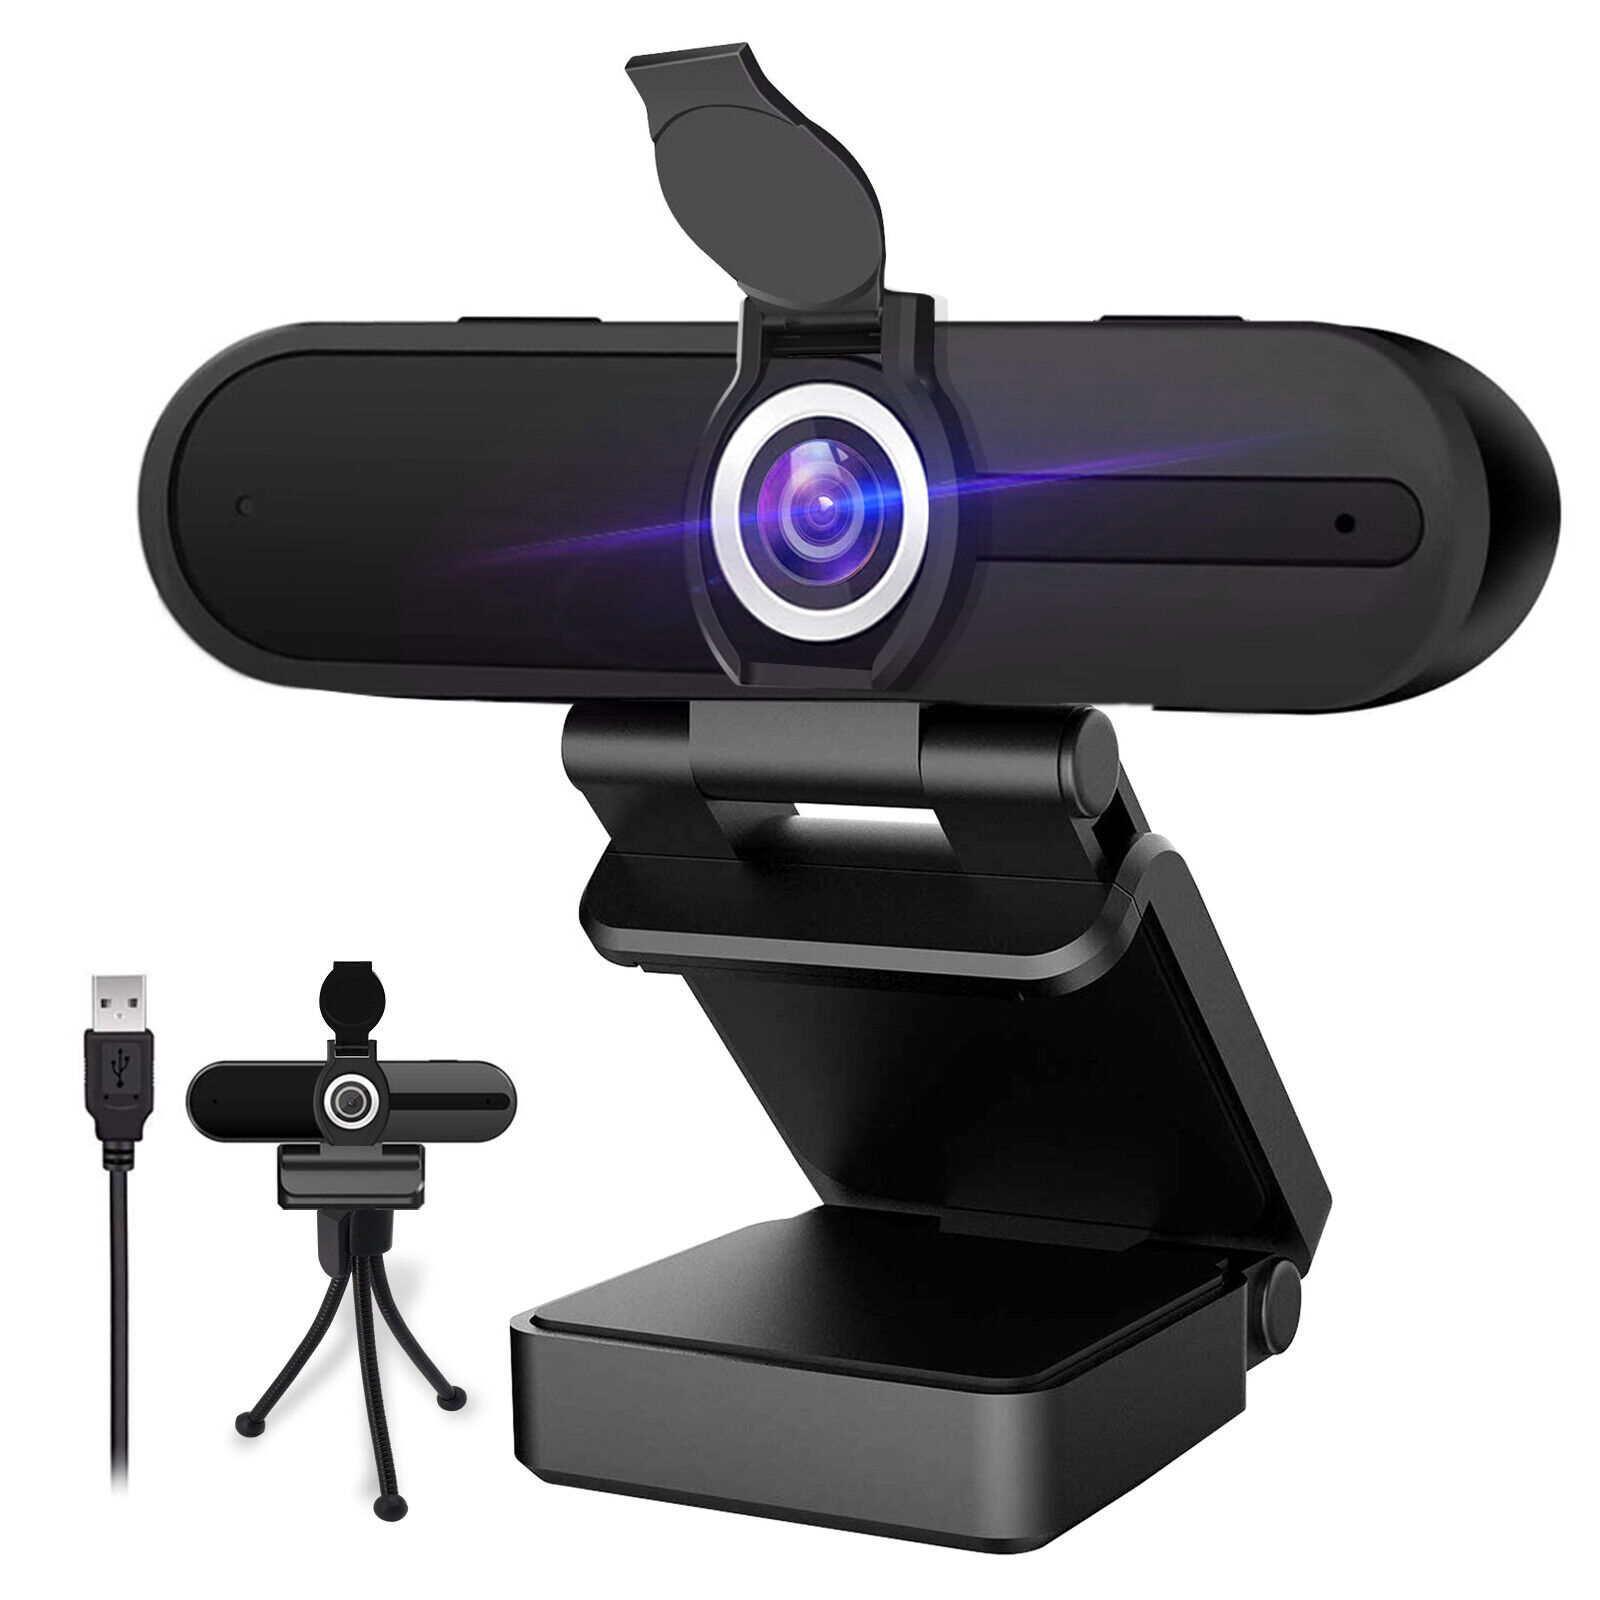 4K USB Webcam with Microphone Full HD Web camera 8MP Fixed Focus Computer Camera